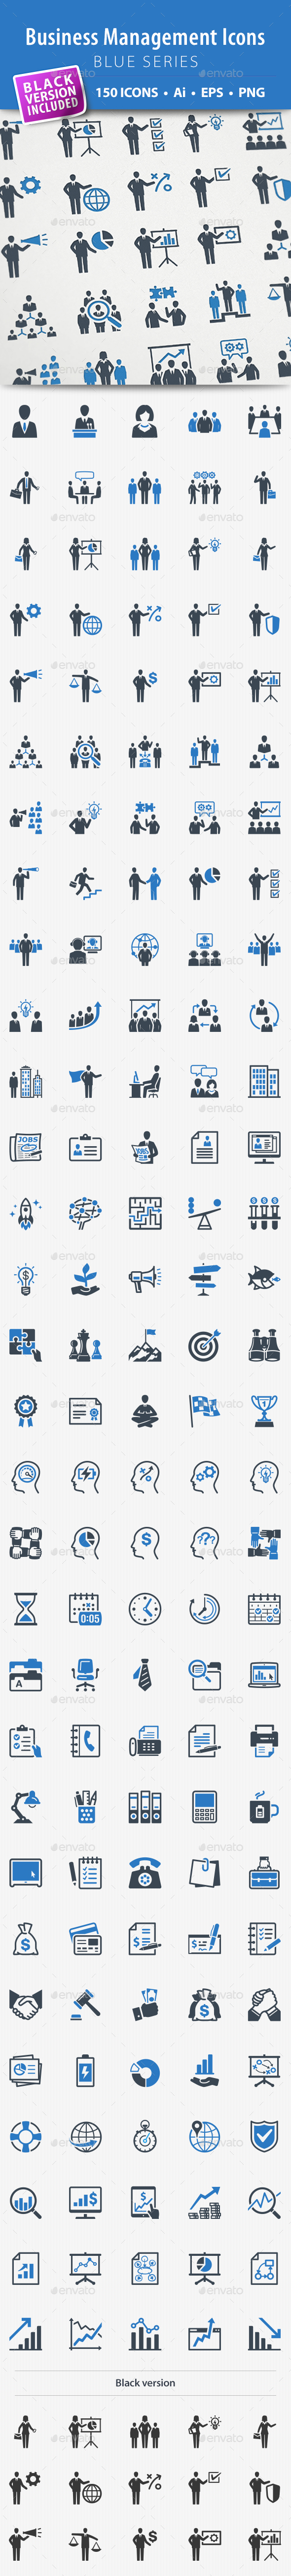 Business Management Icons - Blue Series